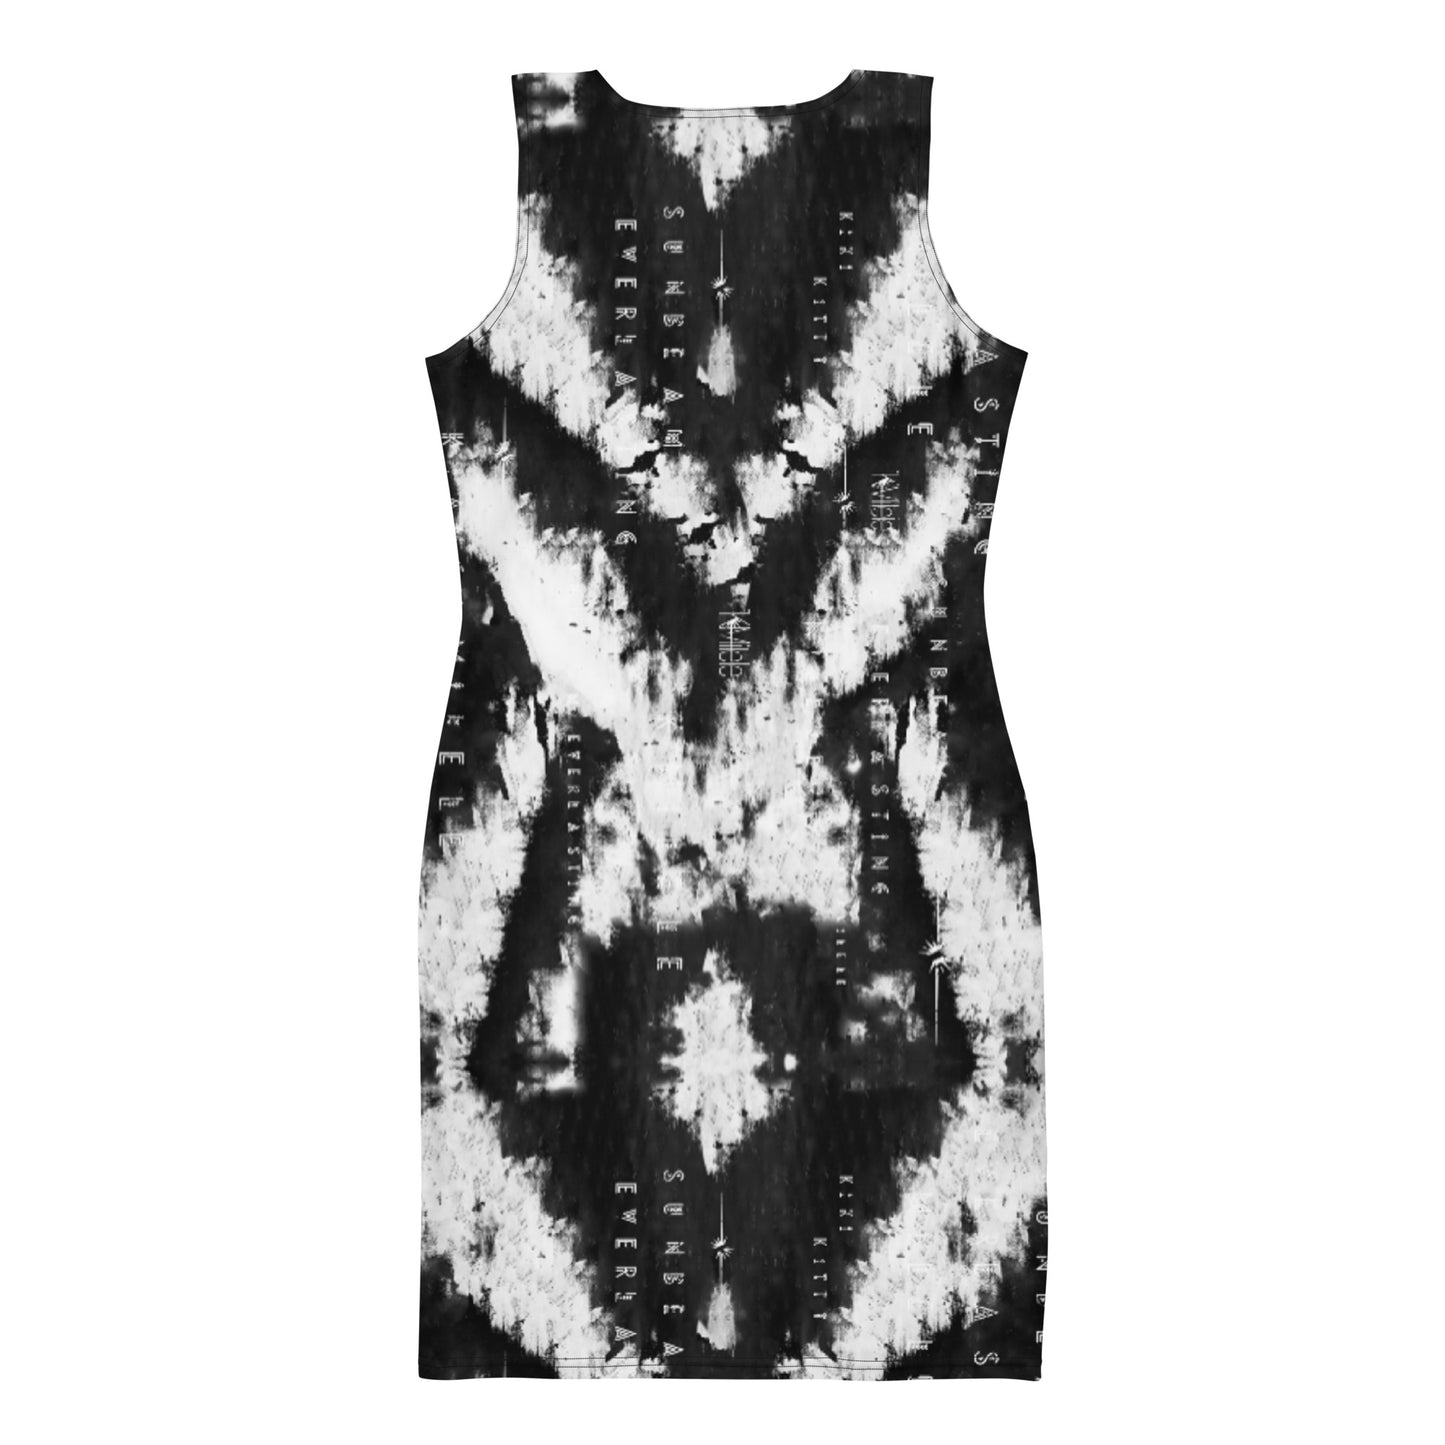 Body Con Dress - Let Me Fly - 25% Off